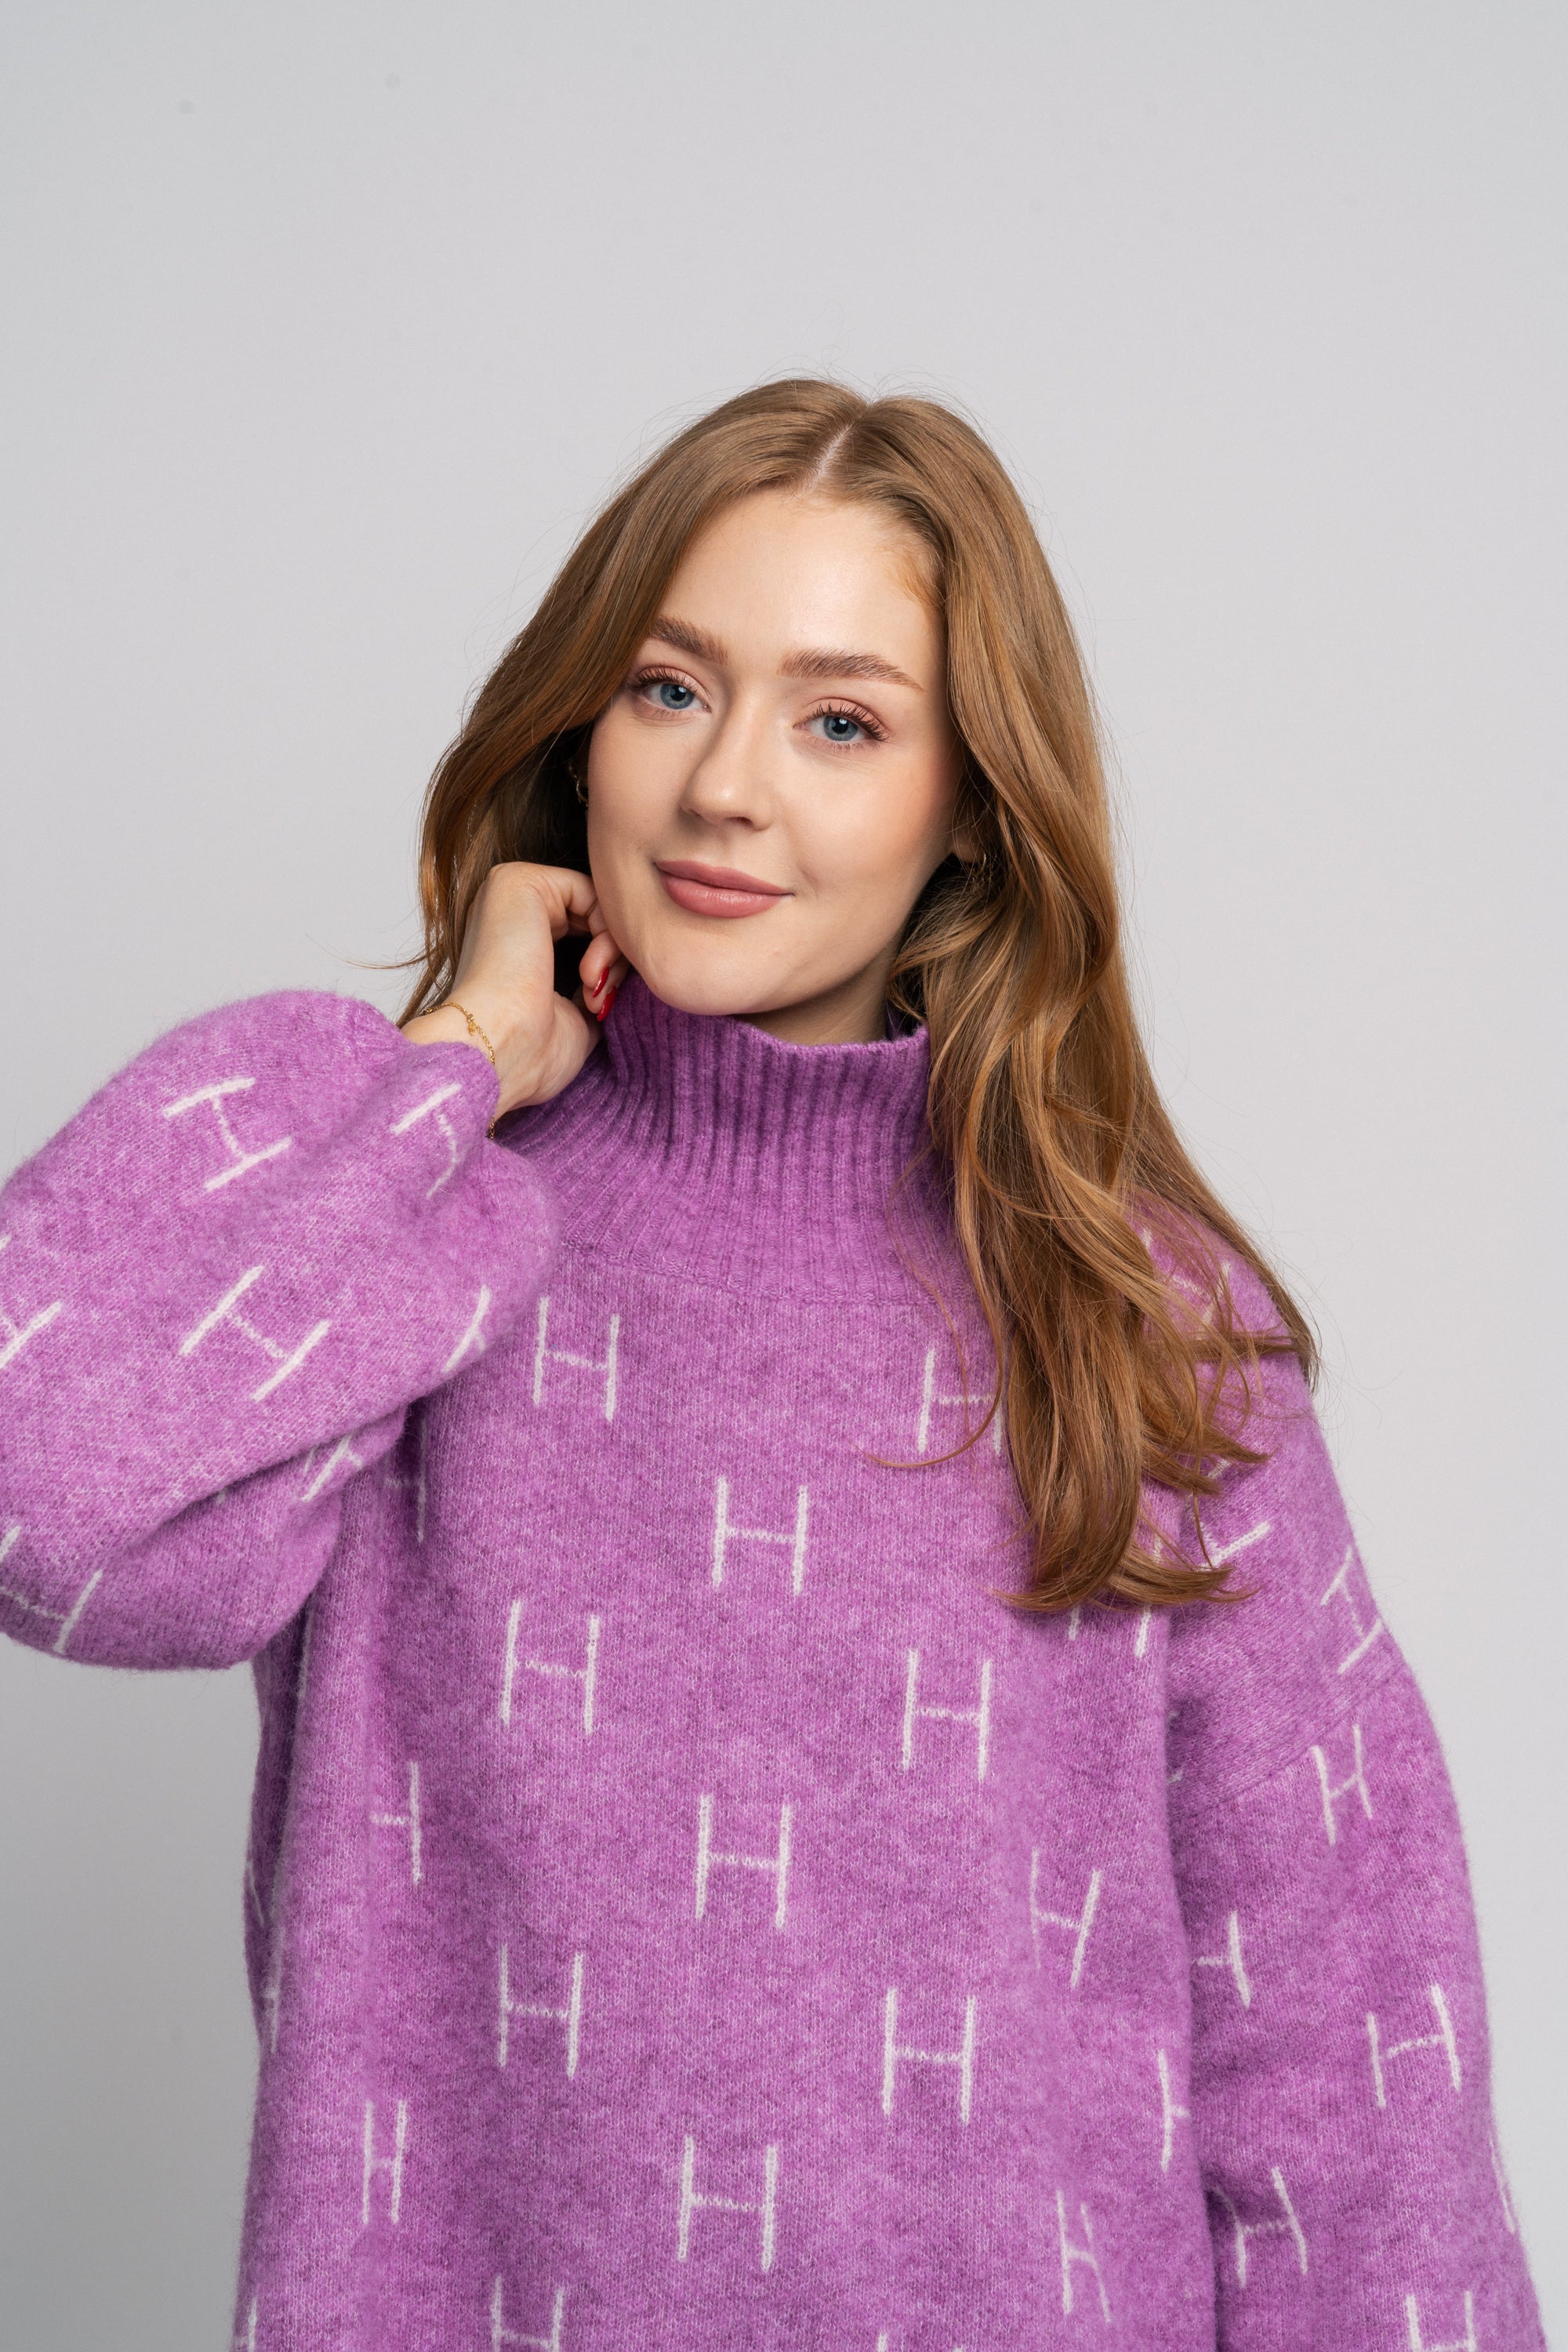 Fam Sweater Long - Radiant Orchid